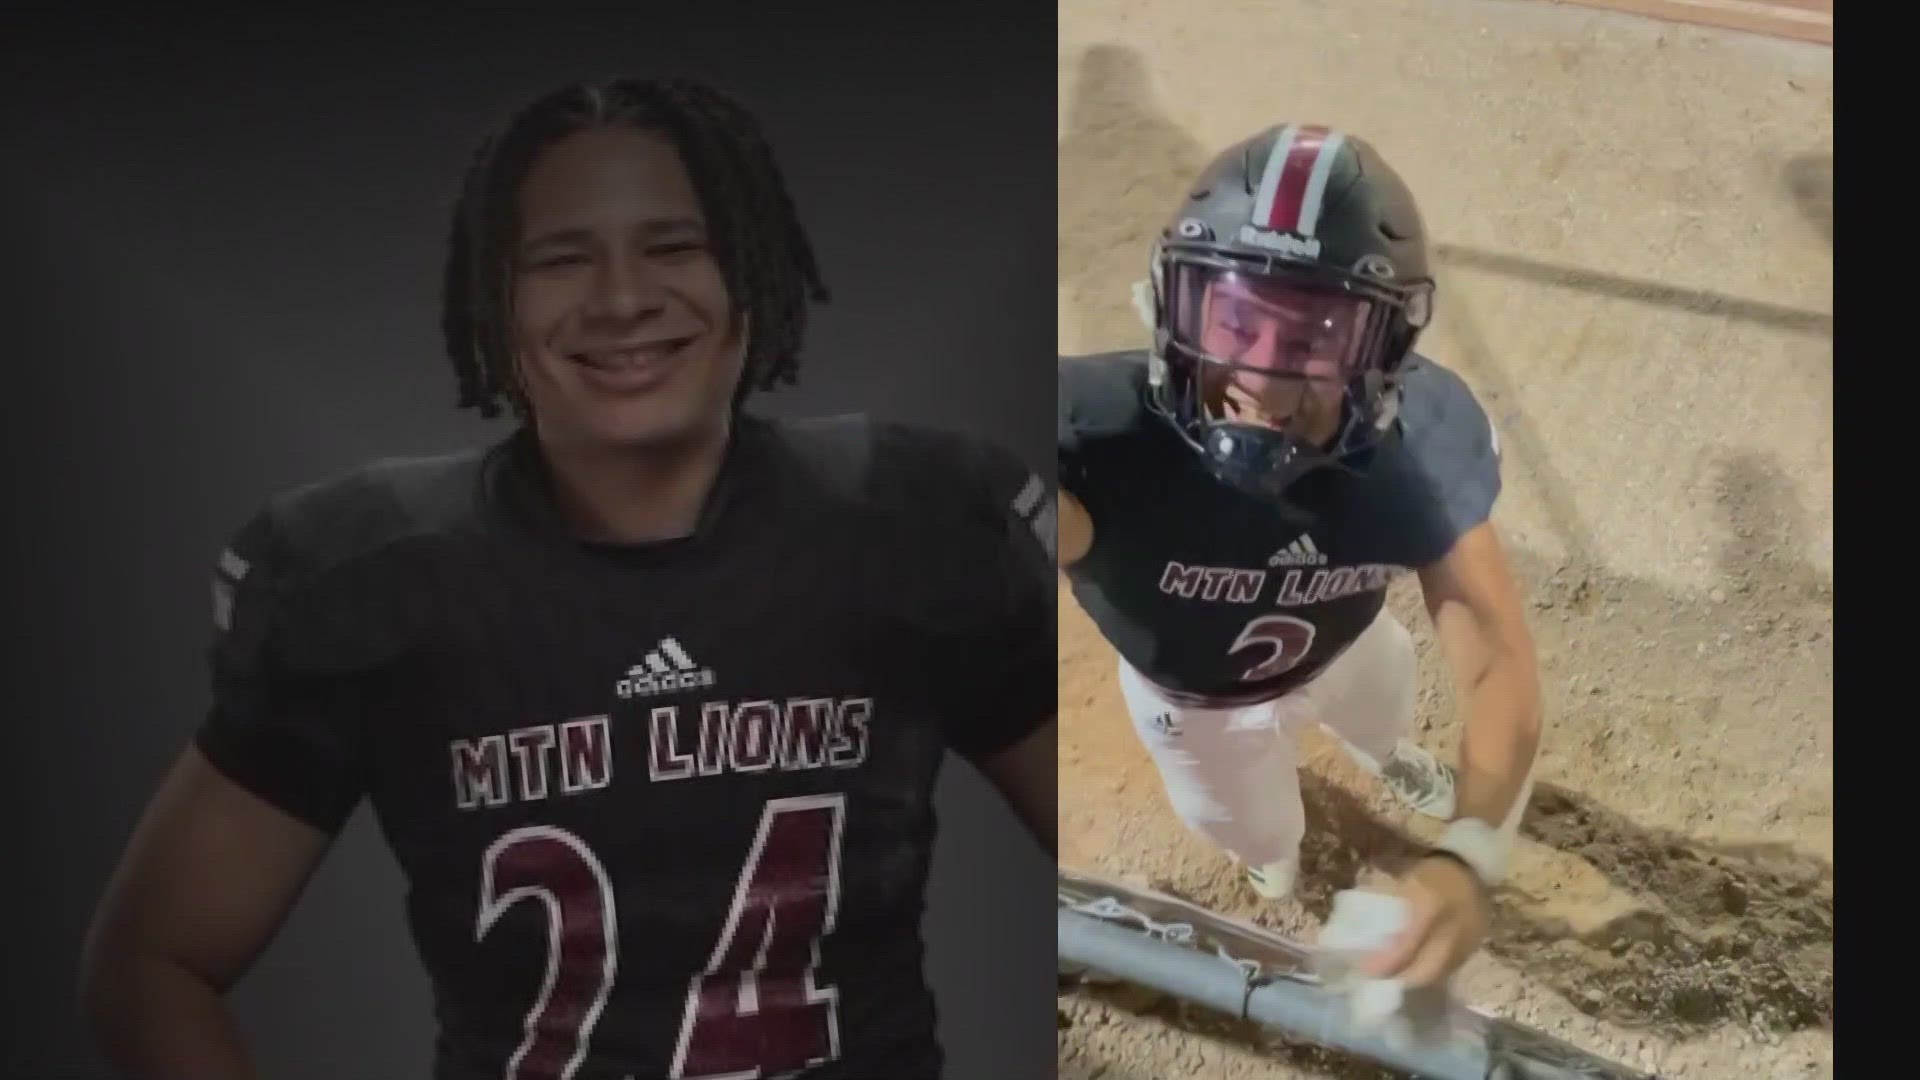 Jeremiah Aviles was murdered at a teammate’s home less than three weeks ago.